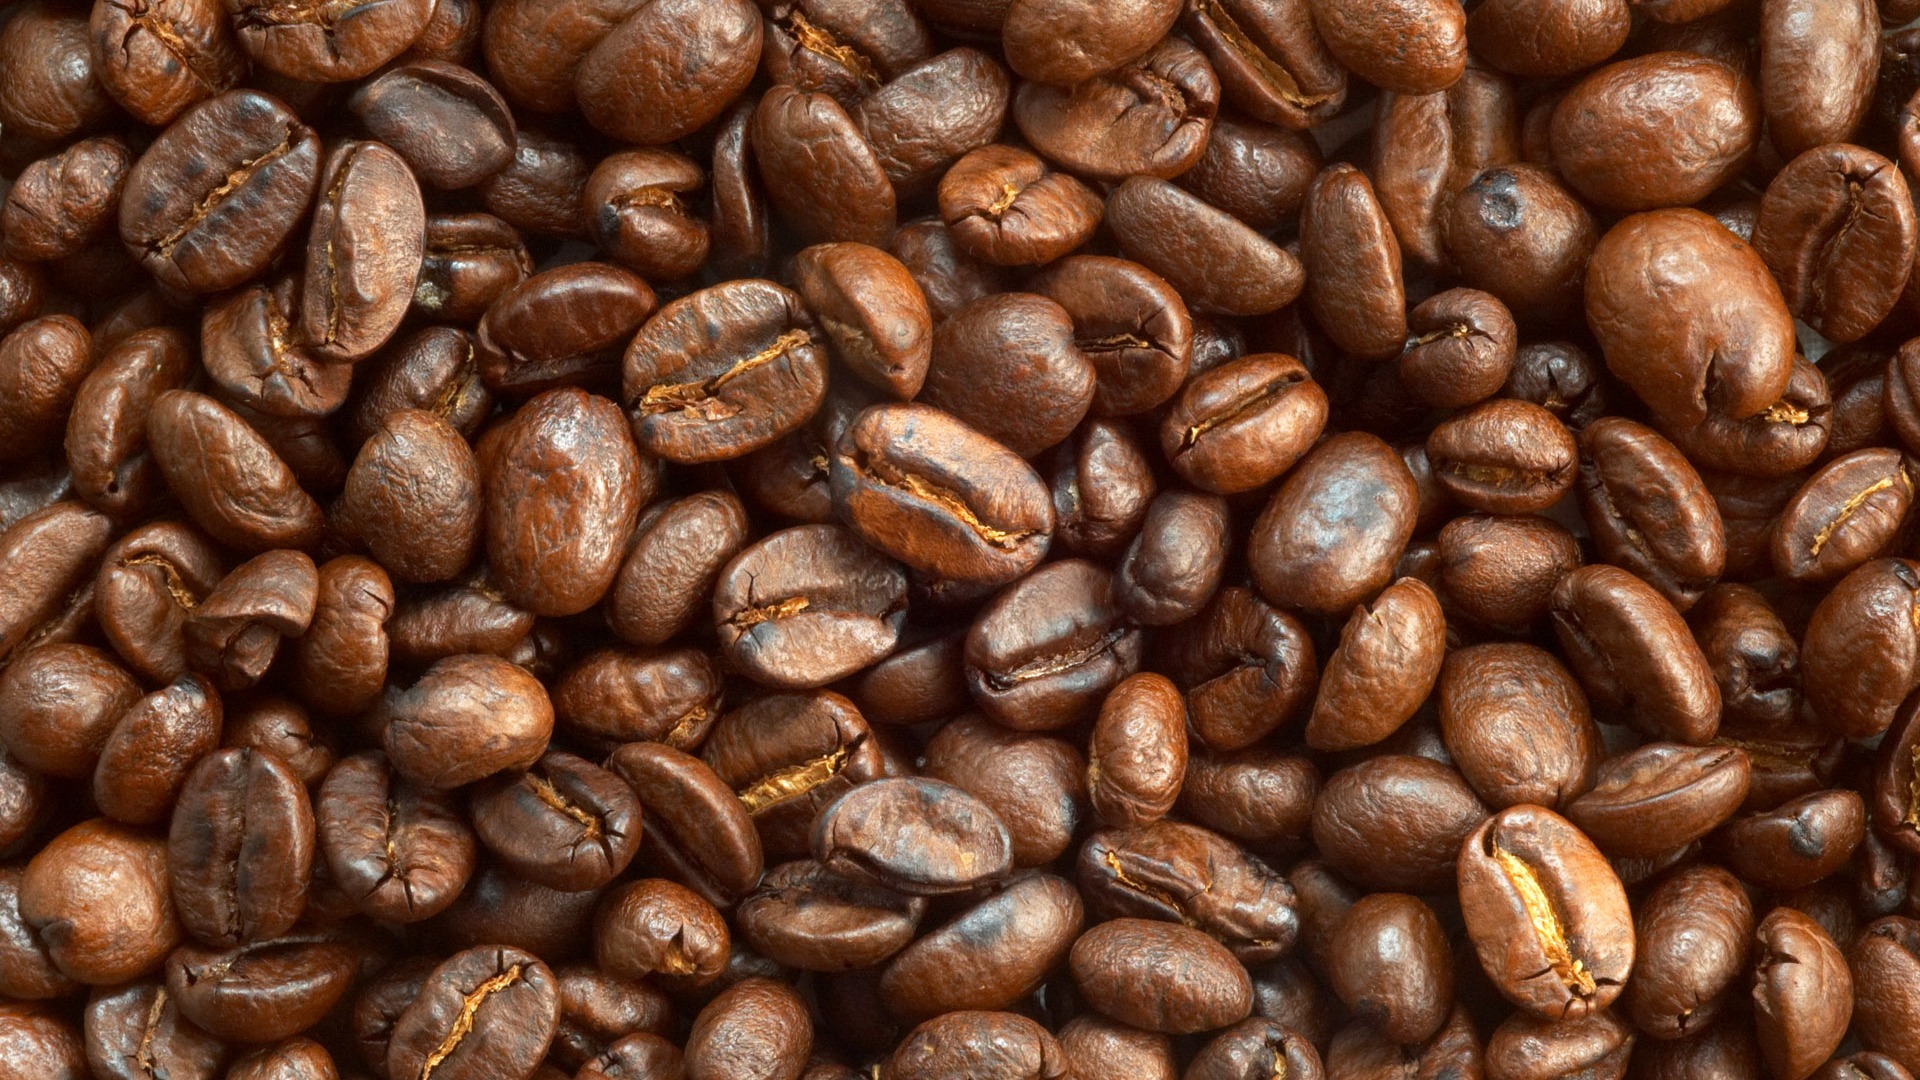 Coffee feature wallpaper (7) #14 - 1920x1080